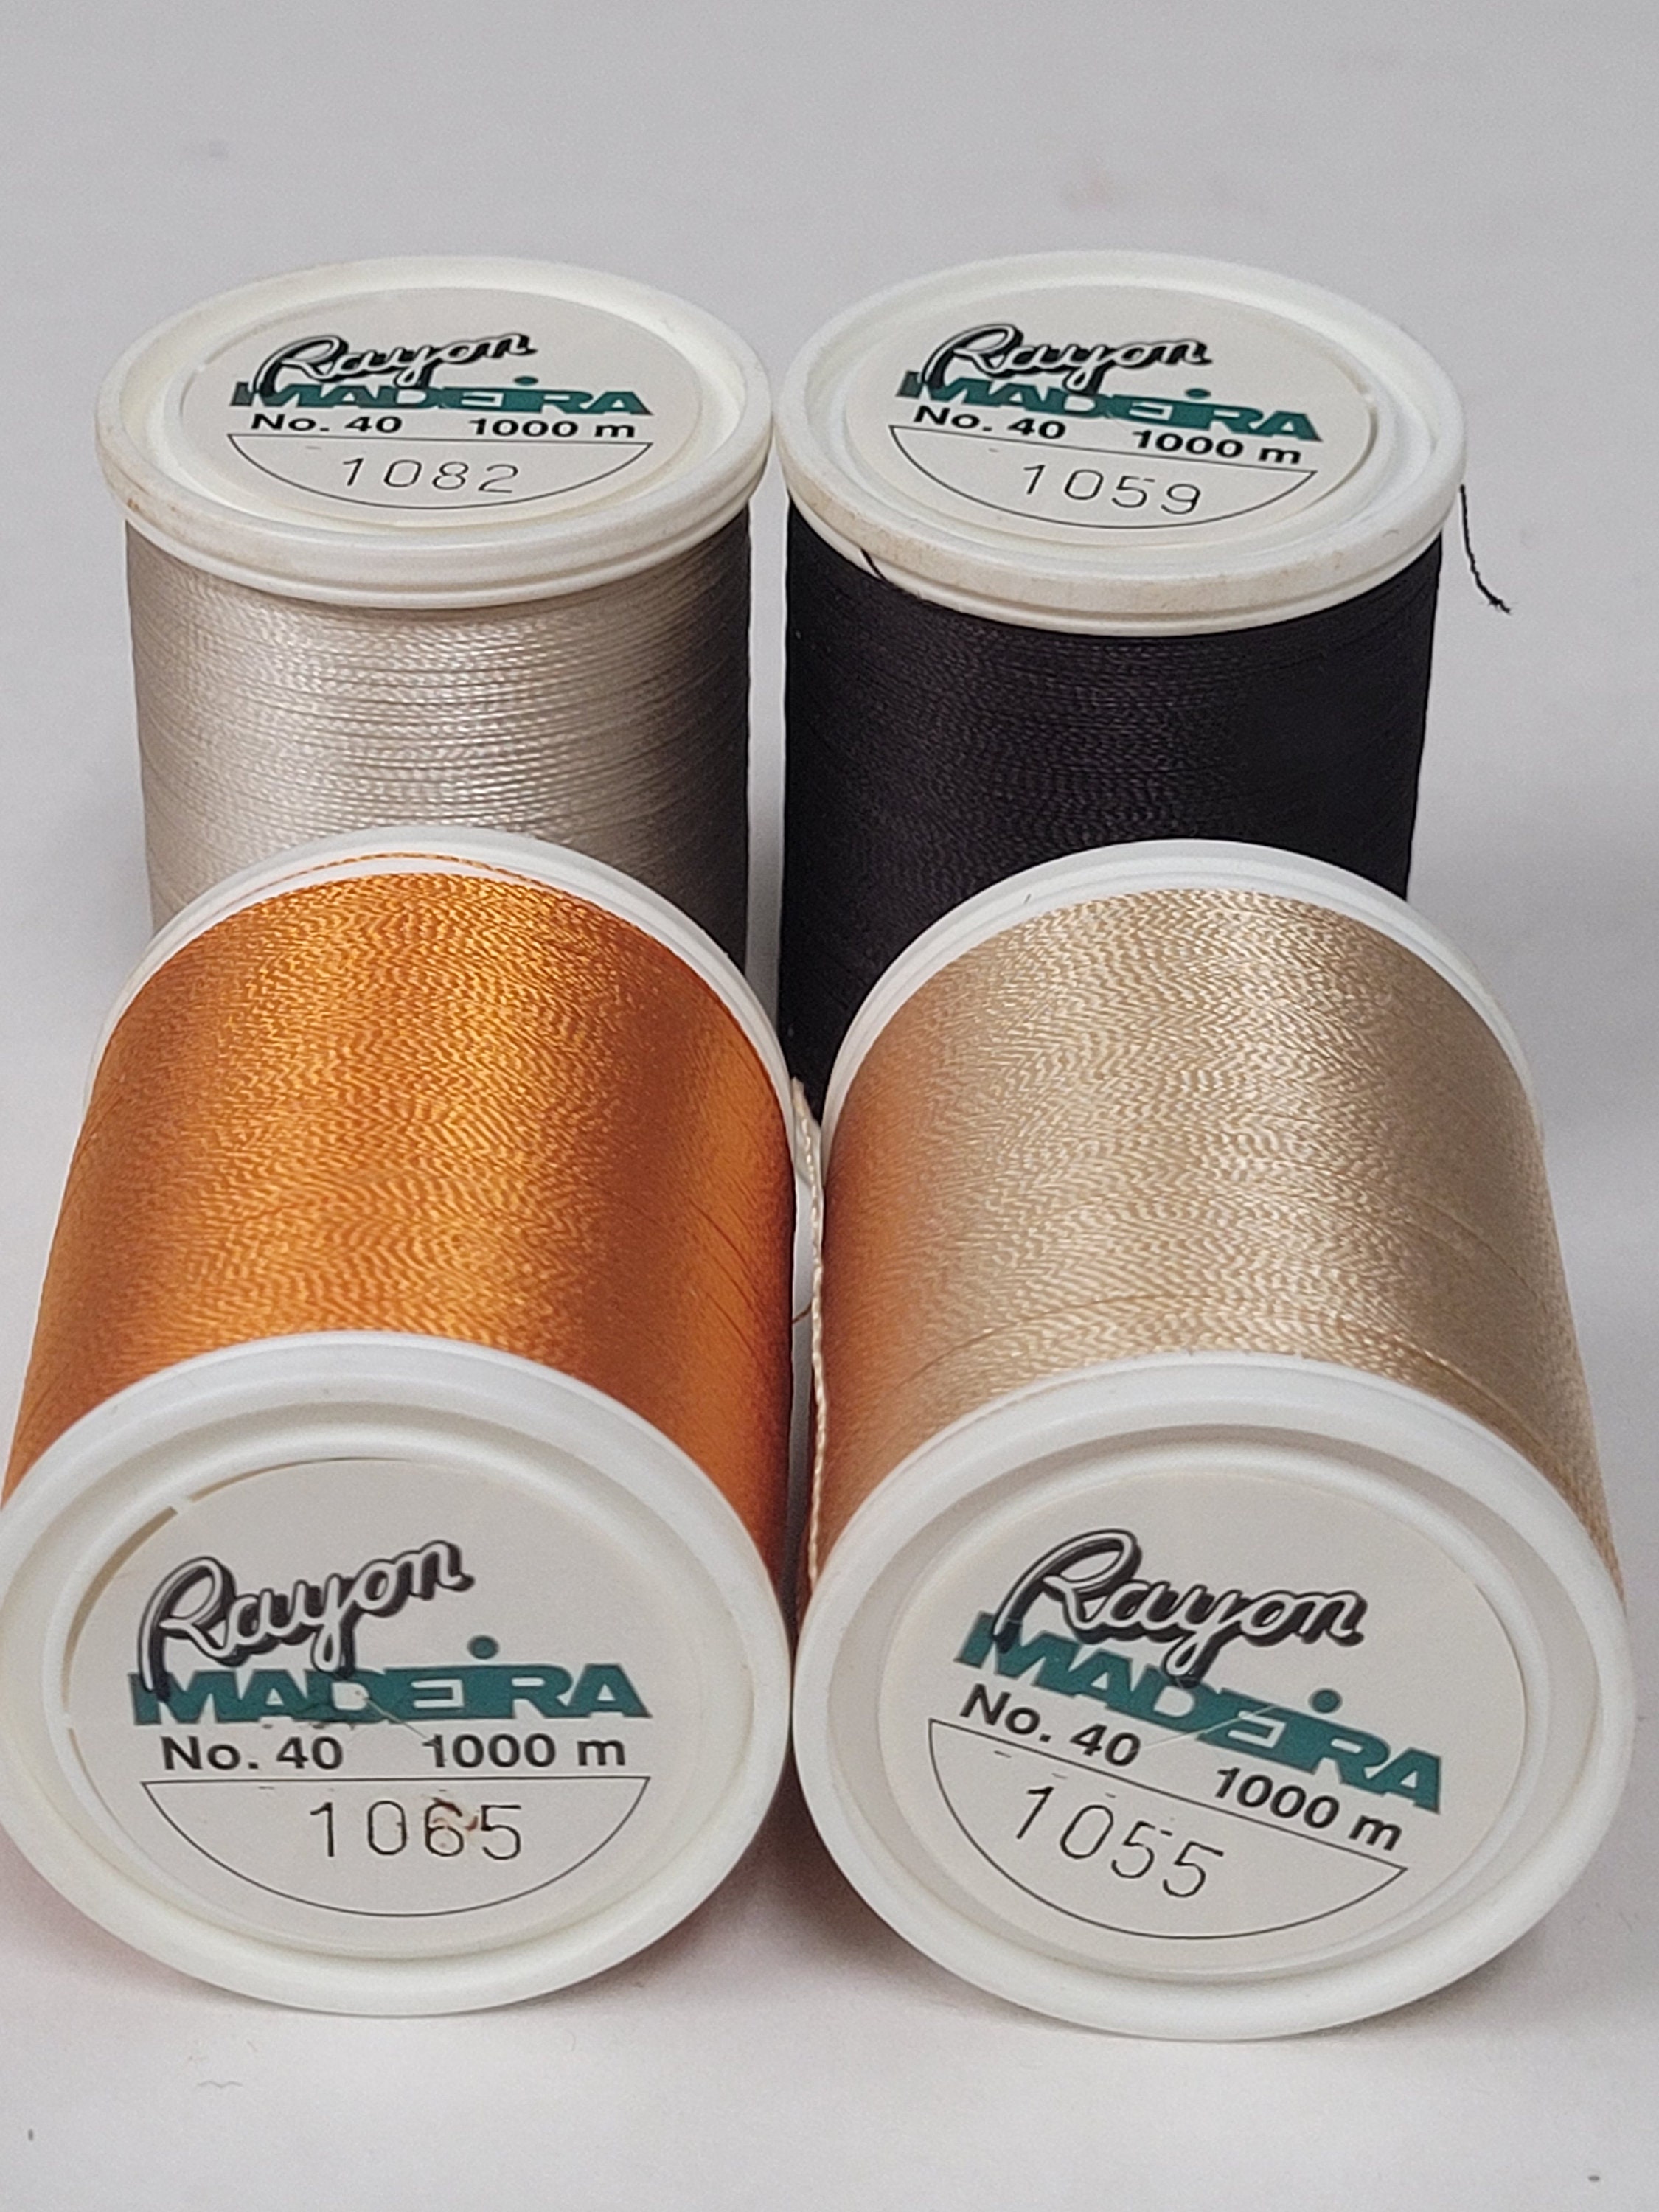 Casewin Sewing Thread Assortment Coil 30 Color 250 Yards Each Polyester Thread  Sewing Kit All Purpose Polyester Thread for Hand and Machine Sewing 